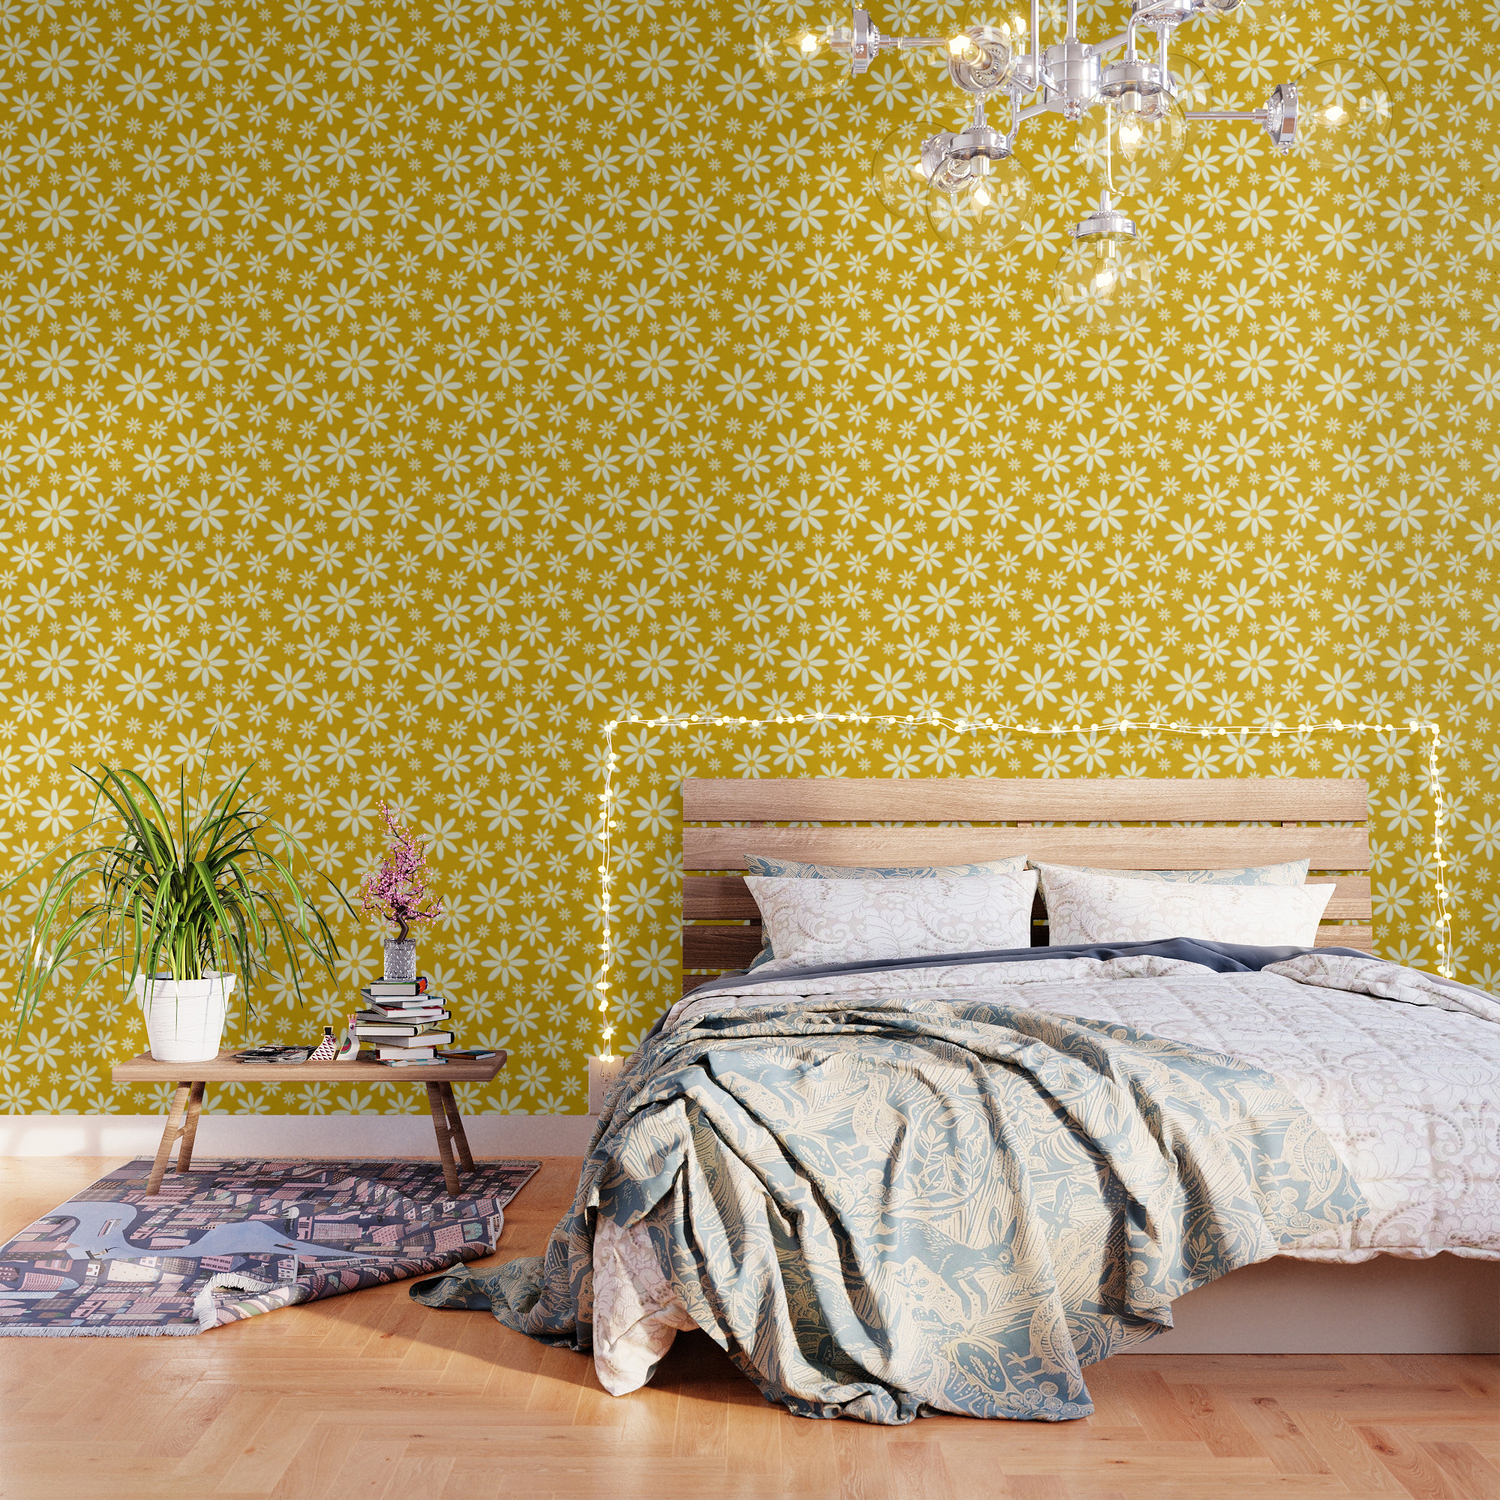 Retro Daisy Pattern in Mustard Yellow, Groovy Daisies Wallpaper by Bobbie  Val | Society6